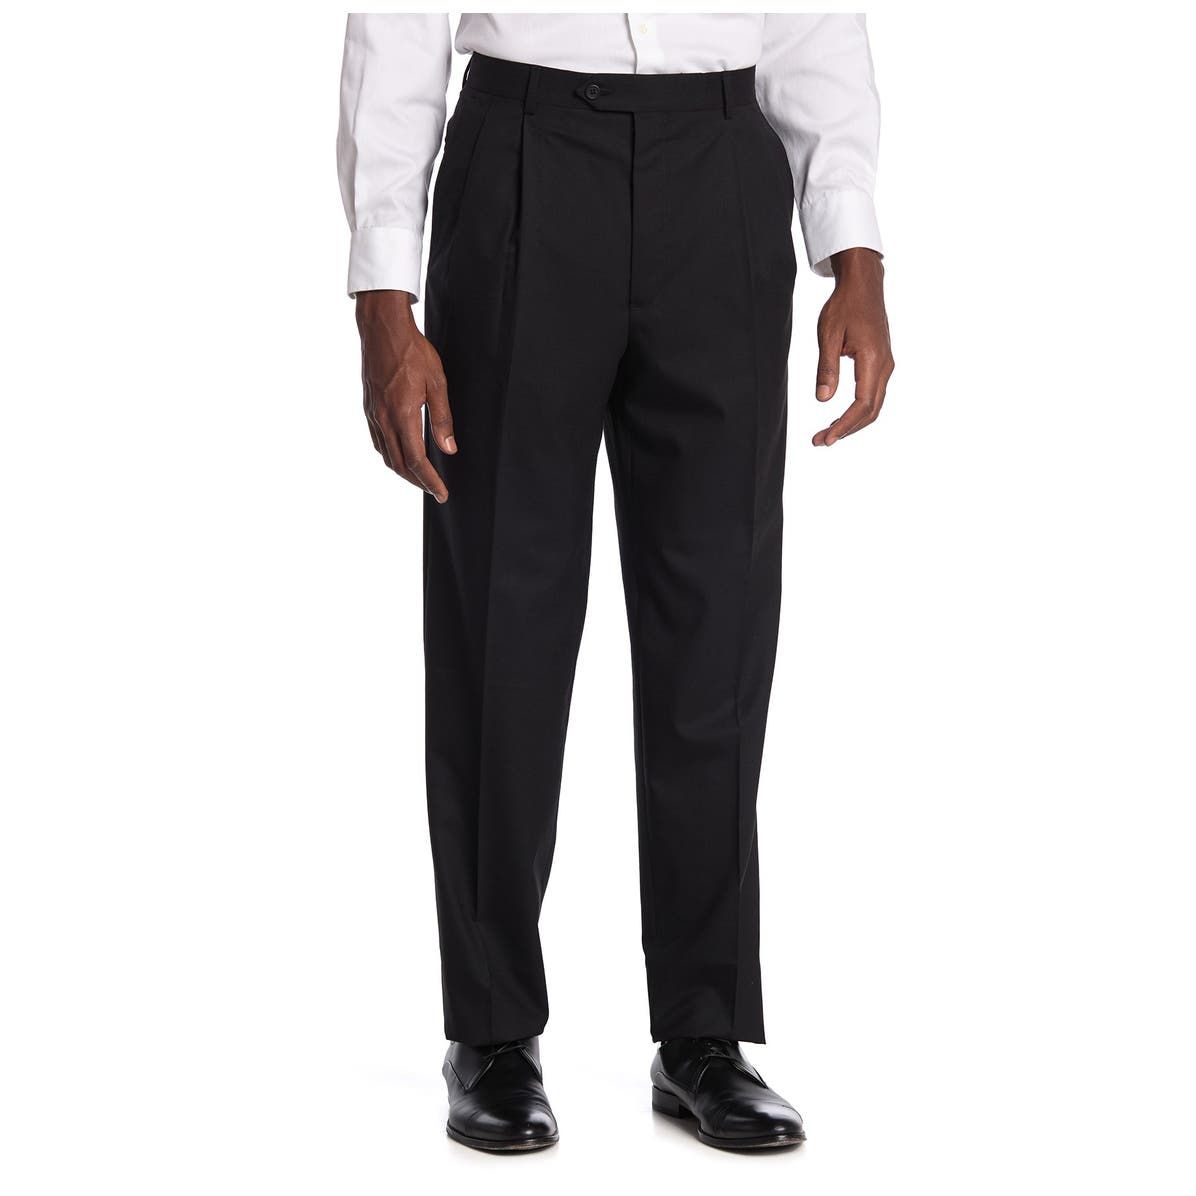 JB Britches Men's Pleated Pants: Refined style & comfort